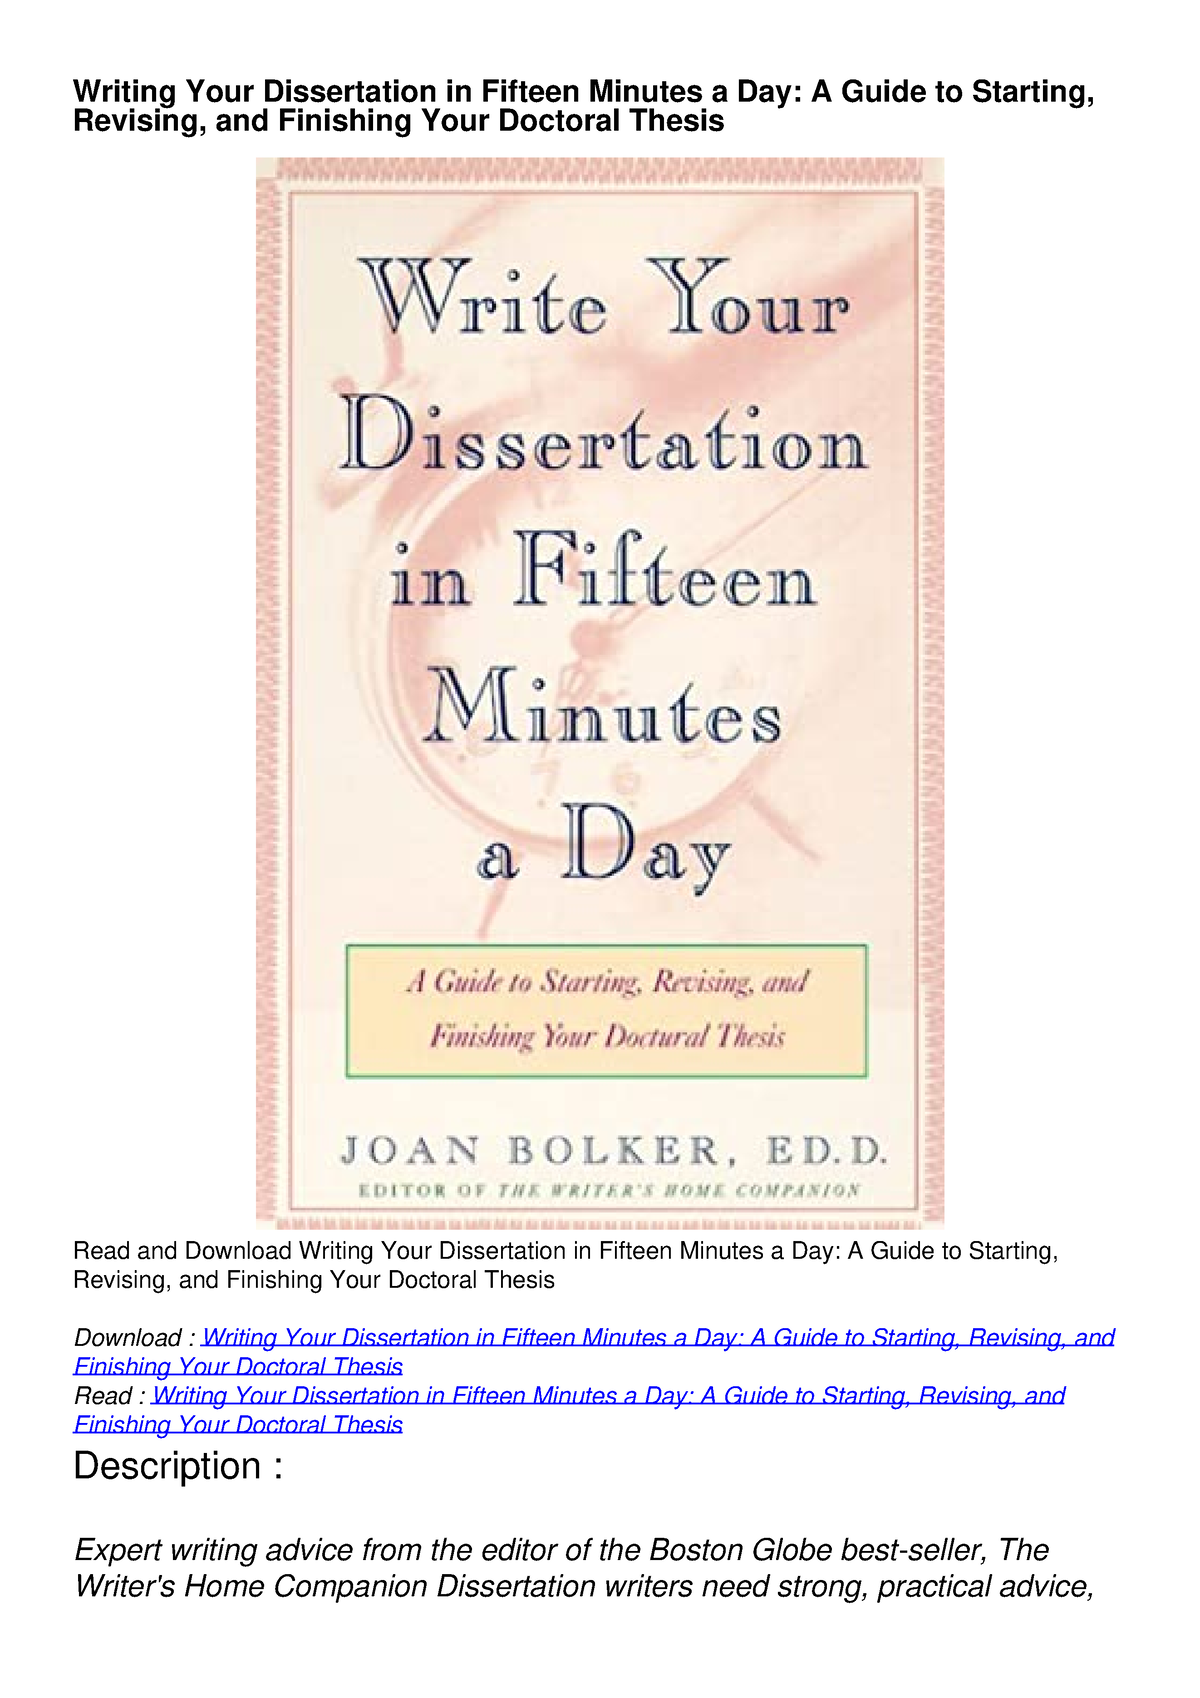 writing your dissertation in fifteen minutes a day pdf download